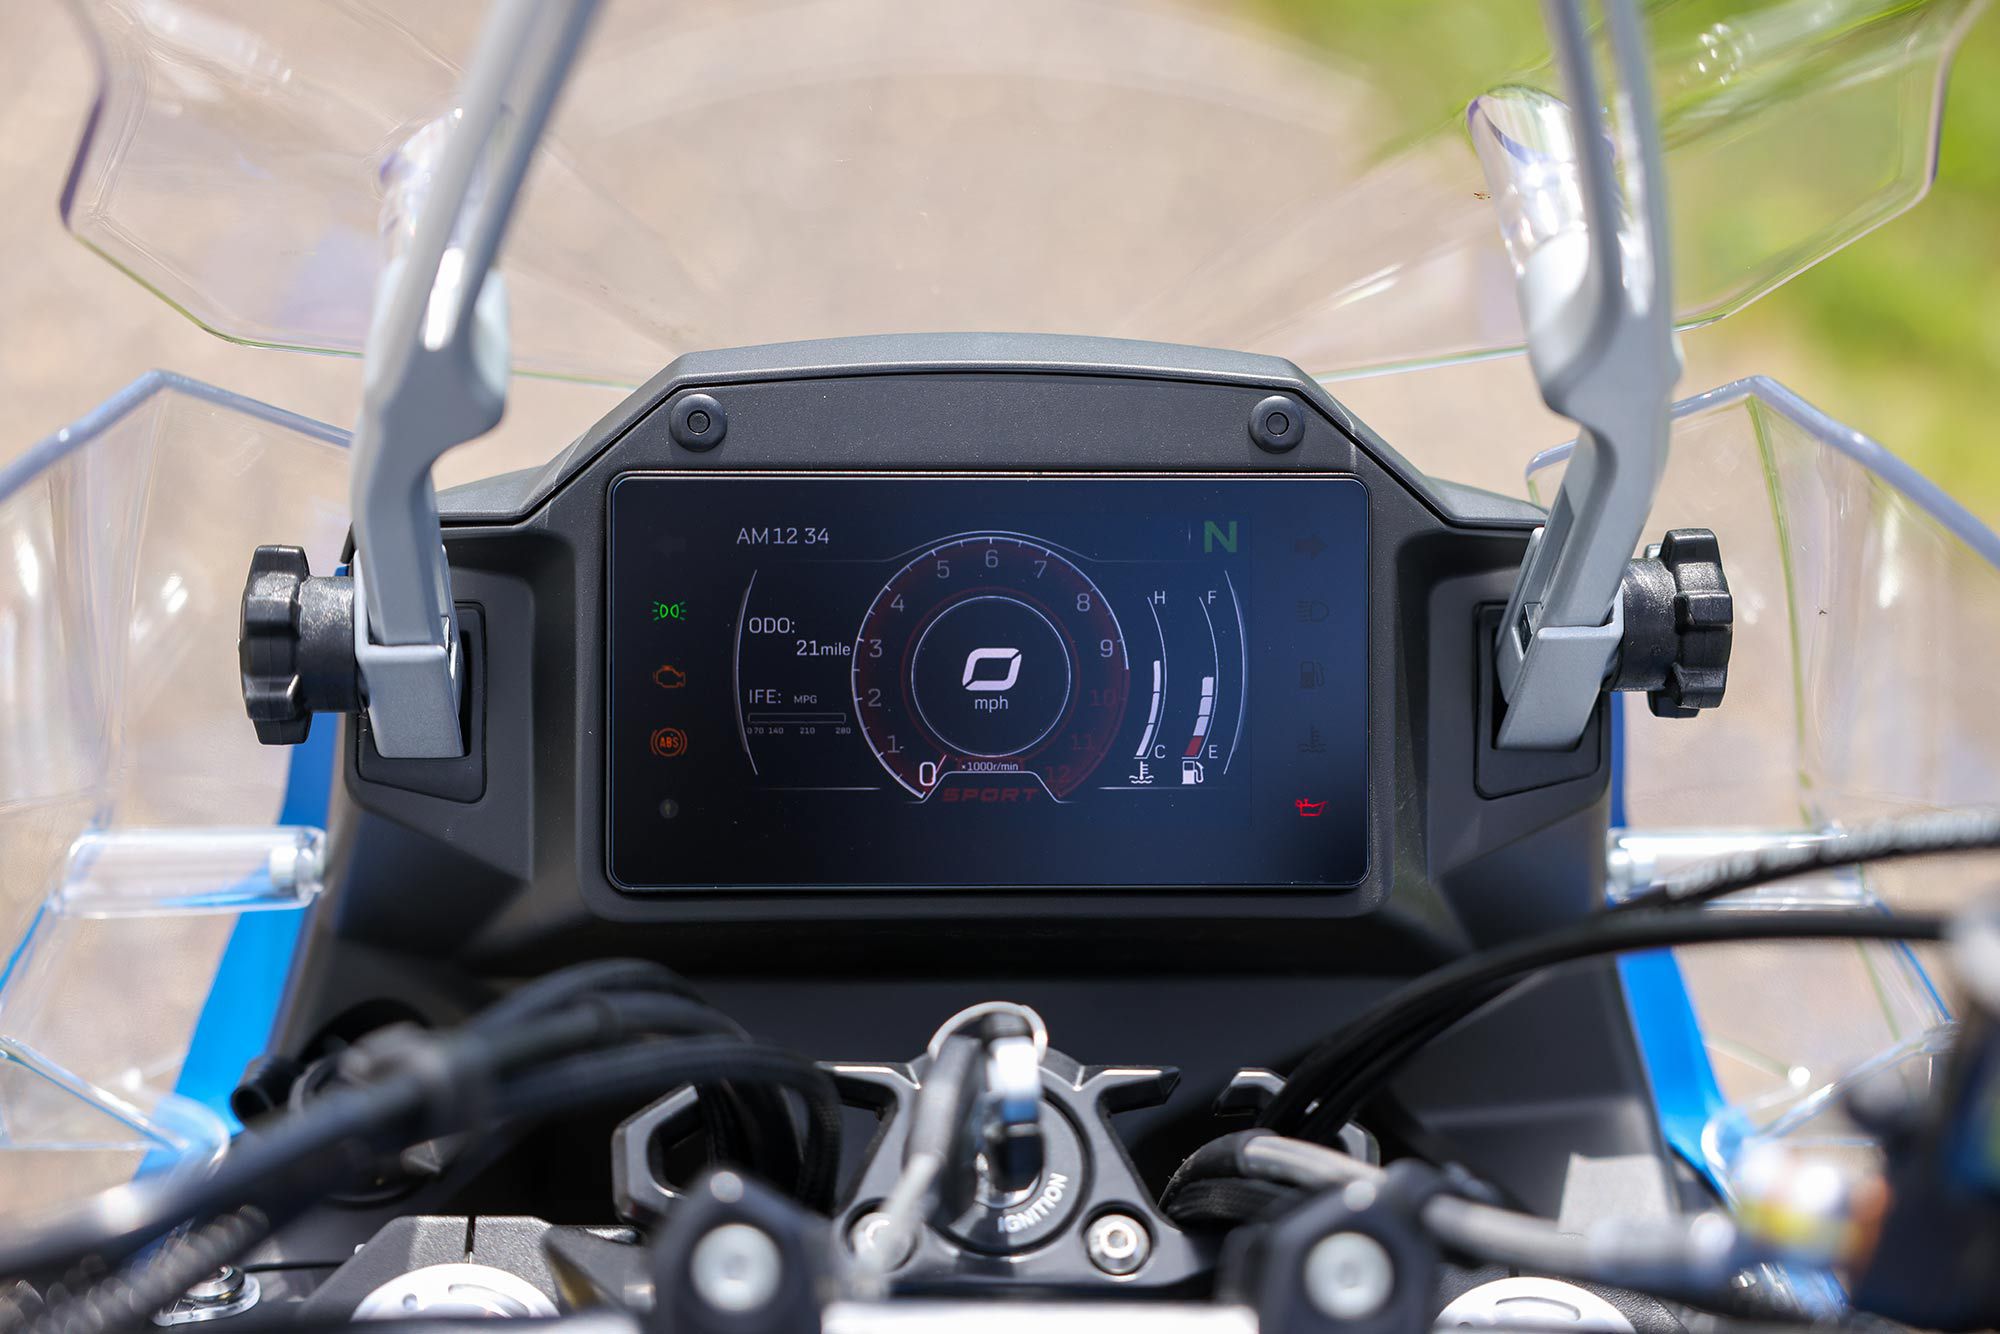 Even more high-end features from CFMoto. The 650 Adventura comes equipped with a 5-inch full-color multifunction thin film transistor (TFT) display screen.